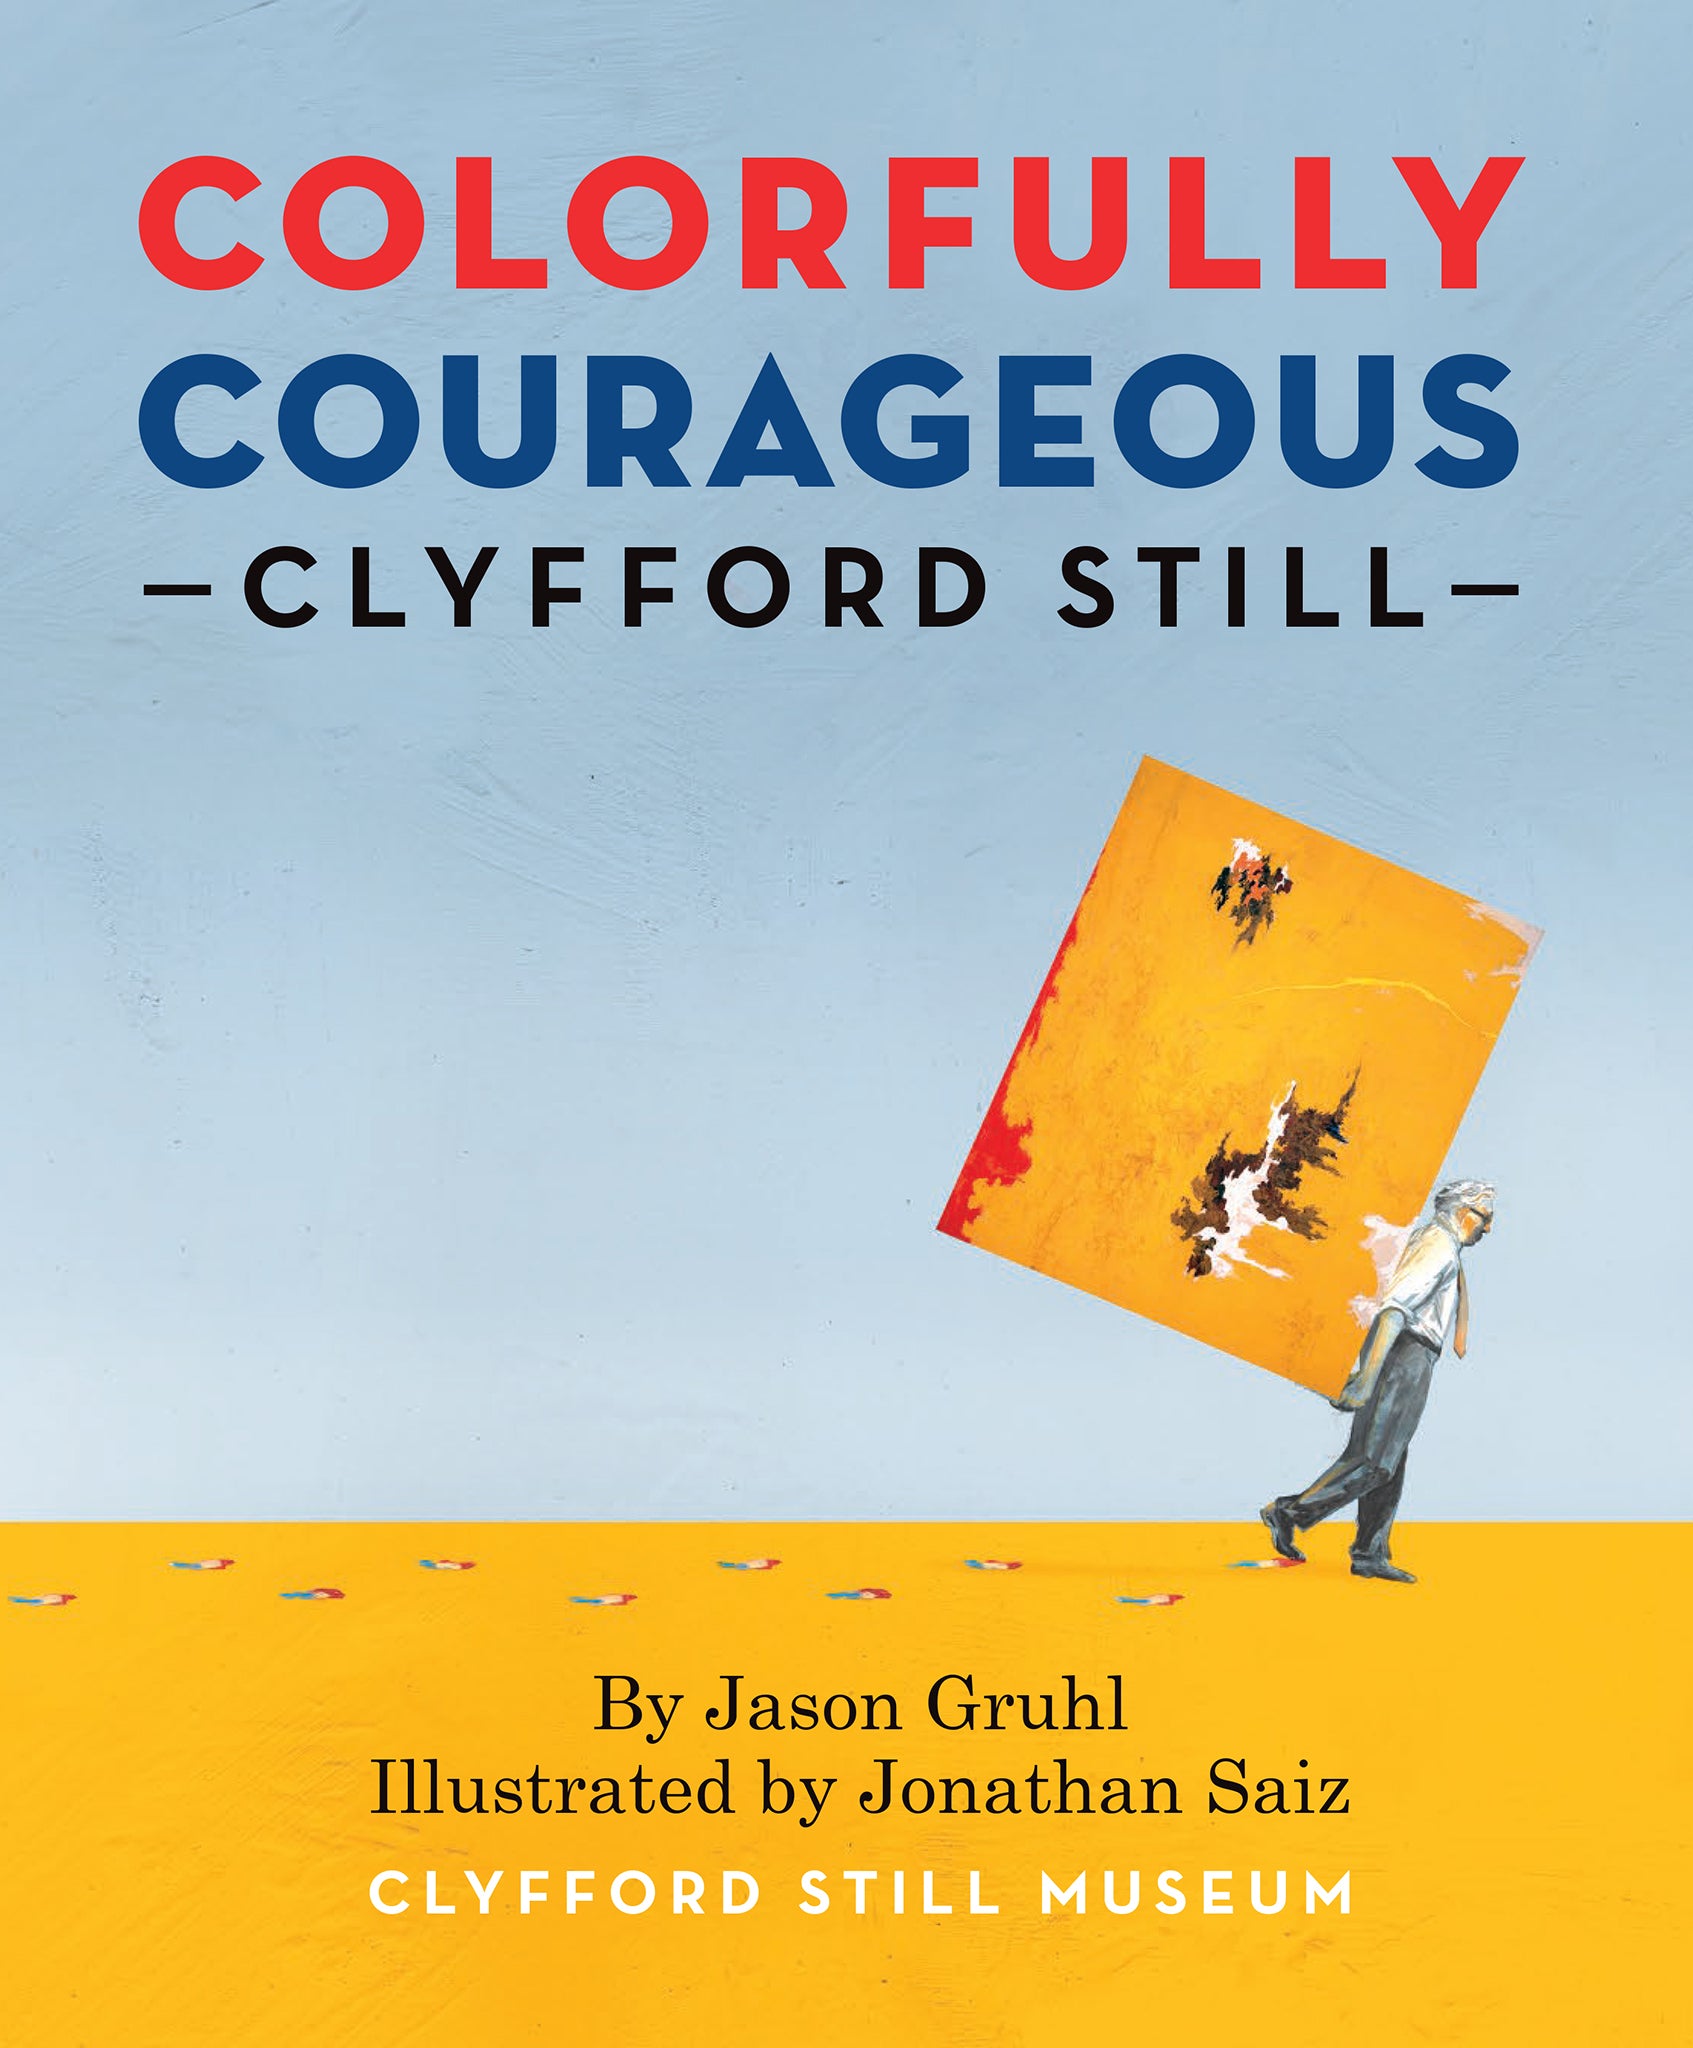 Cover image of Colorfully Courageous Clyfford Still